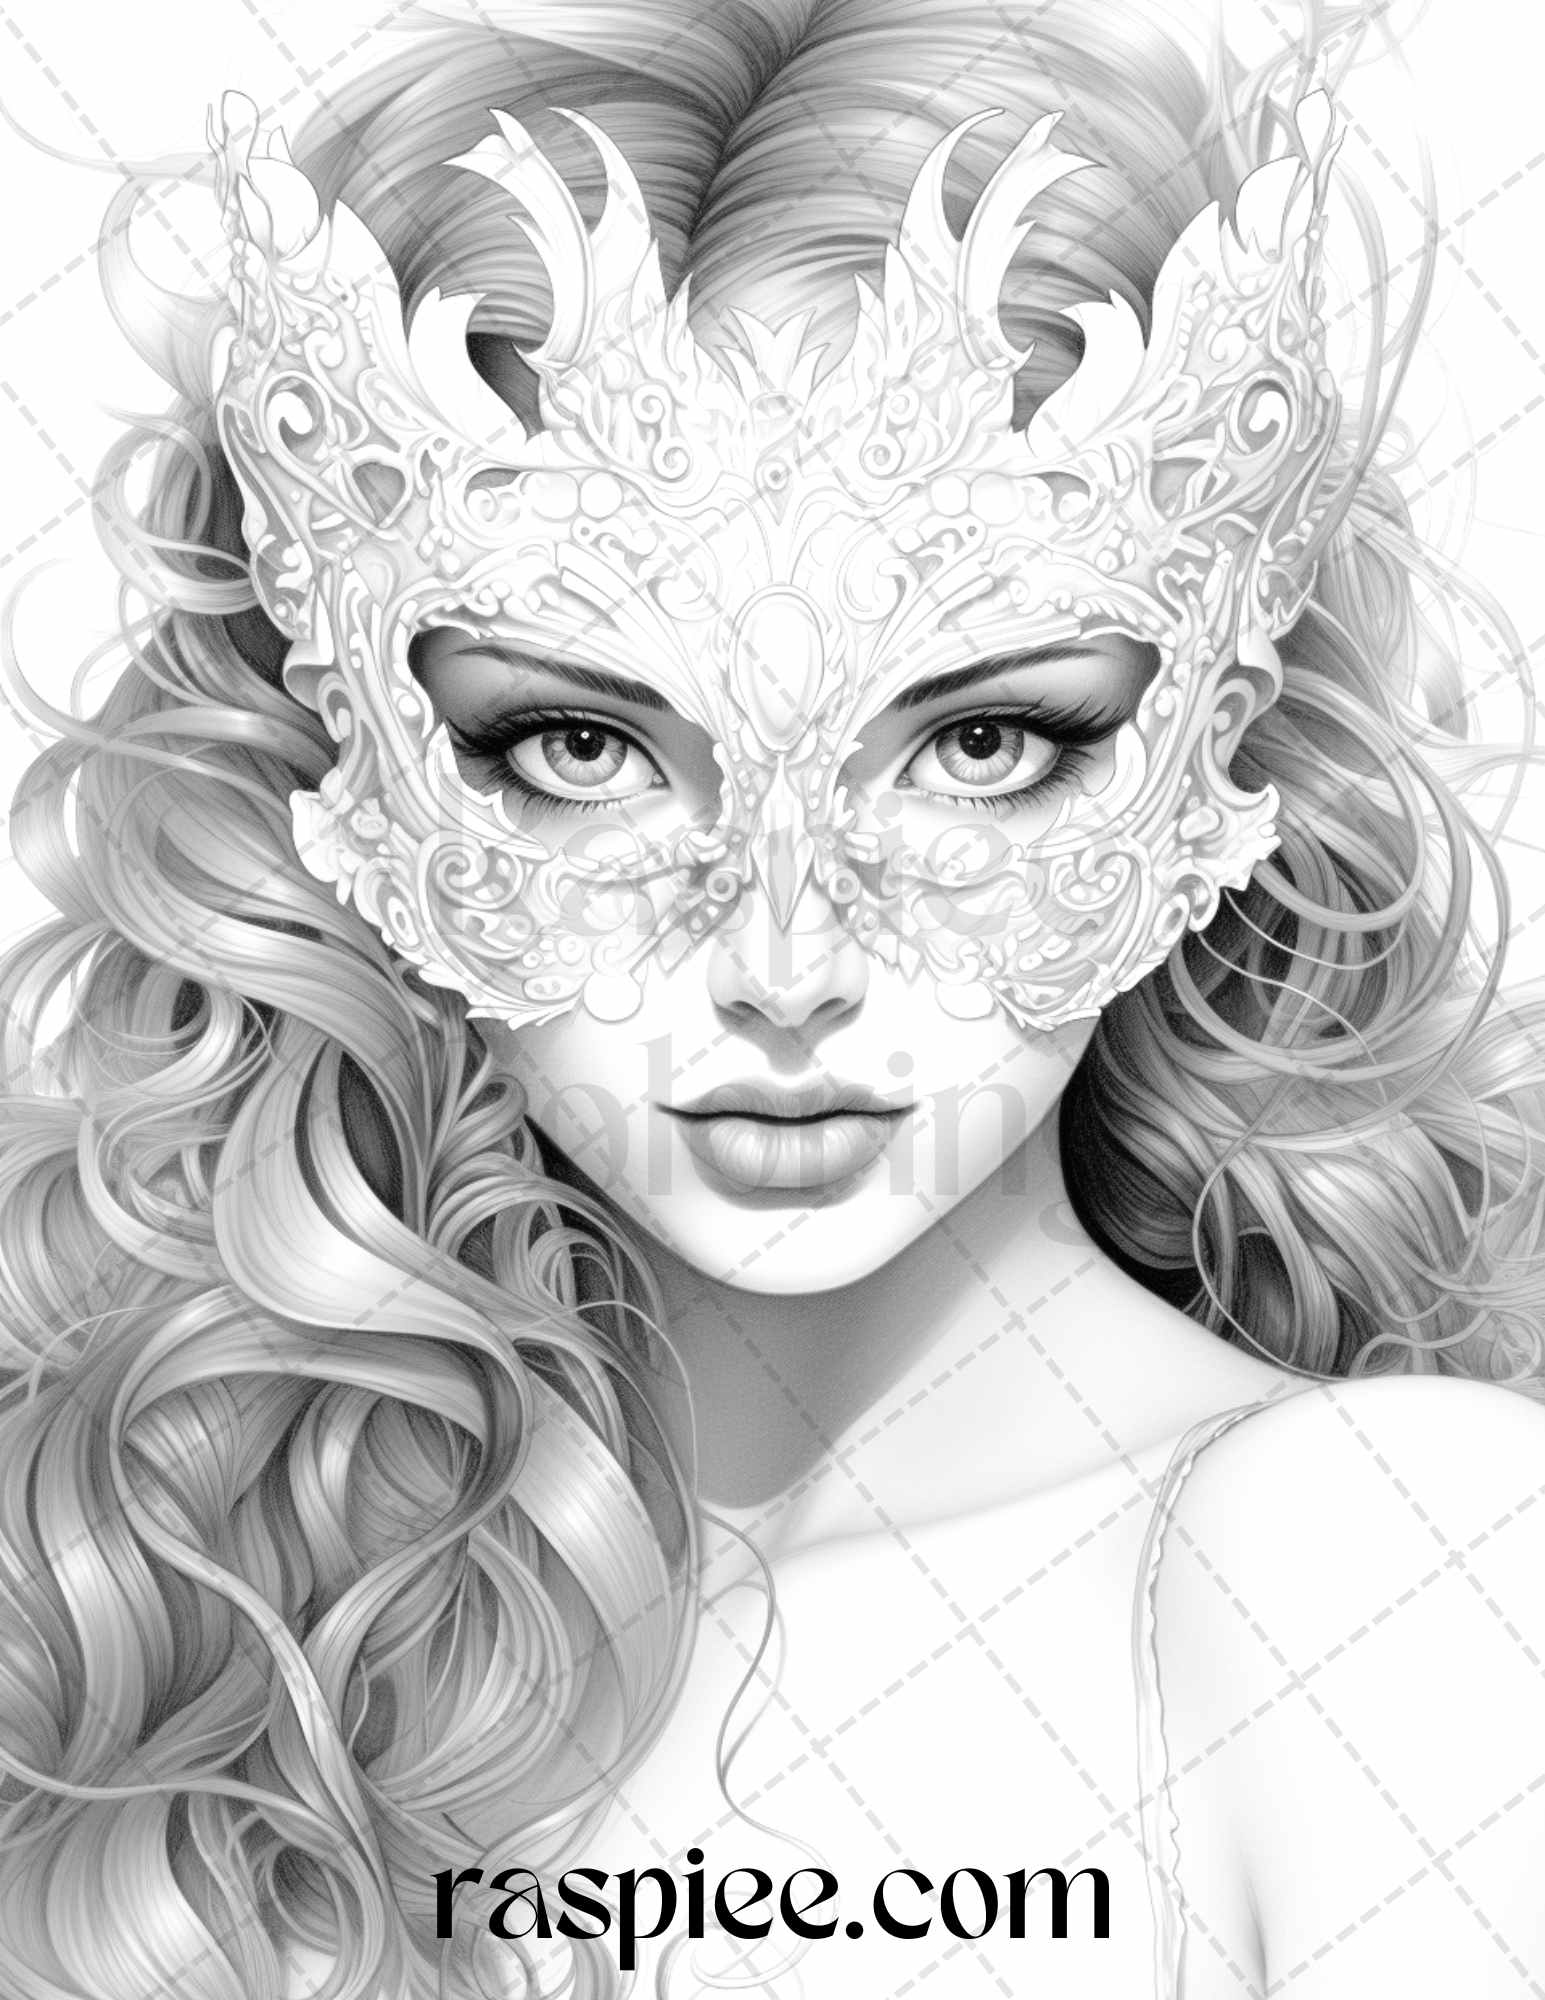 40 Masquerade Girls Grayscale Coloring Pages Printable for Adults, PDF File Instant Download - raspiee